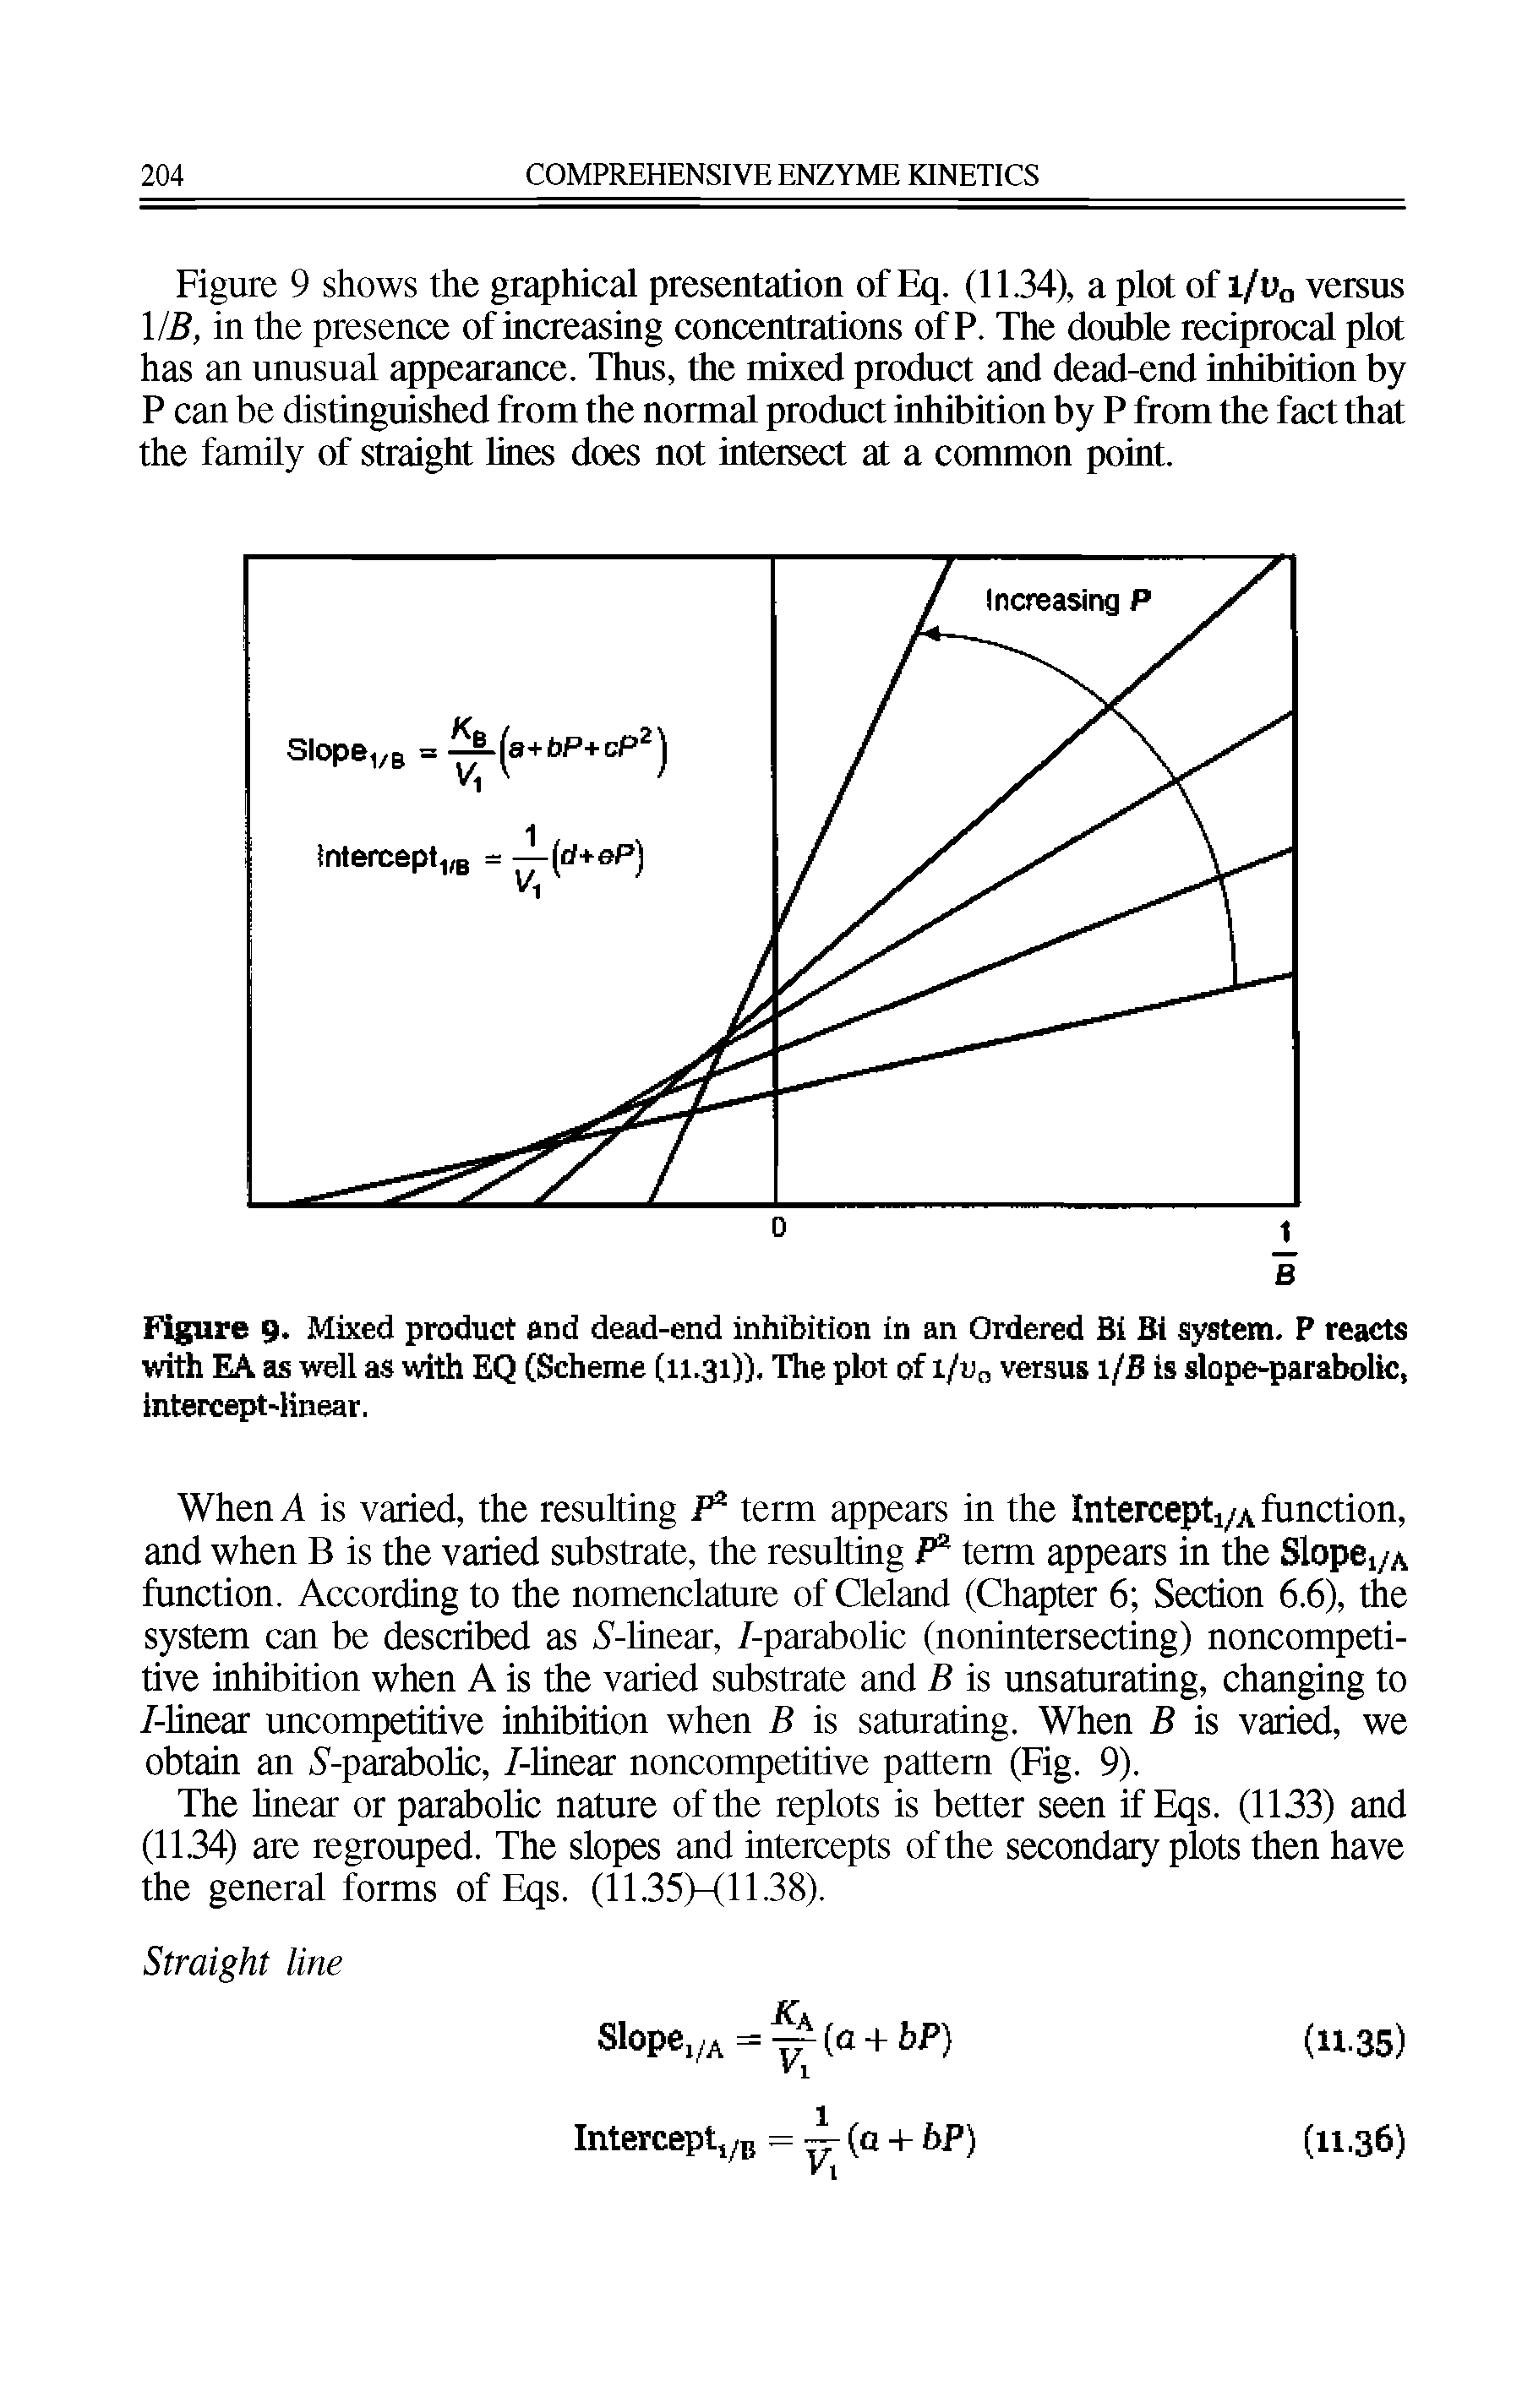 Figure 9. Mixed product and dead-end inhibition in an Ordered Bi Bi system. P reacts with EA as well as with EQ (Scheme (11.31)). The plot of i/un versus l/B is slope-parabolic, intercept-linear.